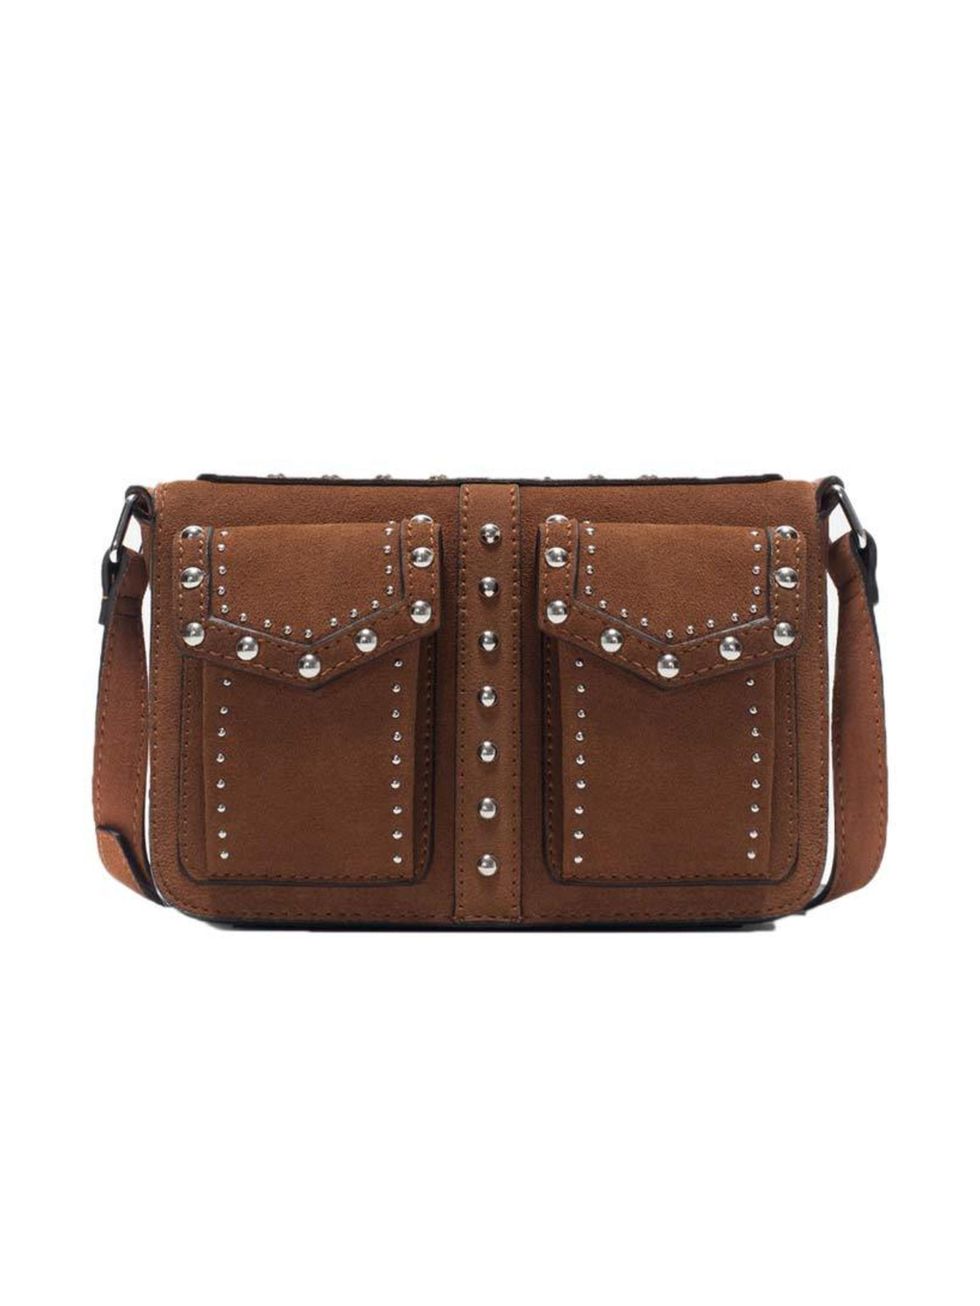 <p>Sub-Editor Claire Sibbick snagged this vintage-inspired bag.</p>

<p><a href="http://www.zara.com/uk/en/new-this-week/woman/studded-messenger-bag-c363008p2539596.html" target="_blank">Zara</a> bag, &pound;69.99</p>